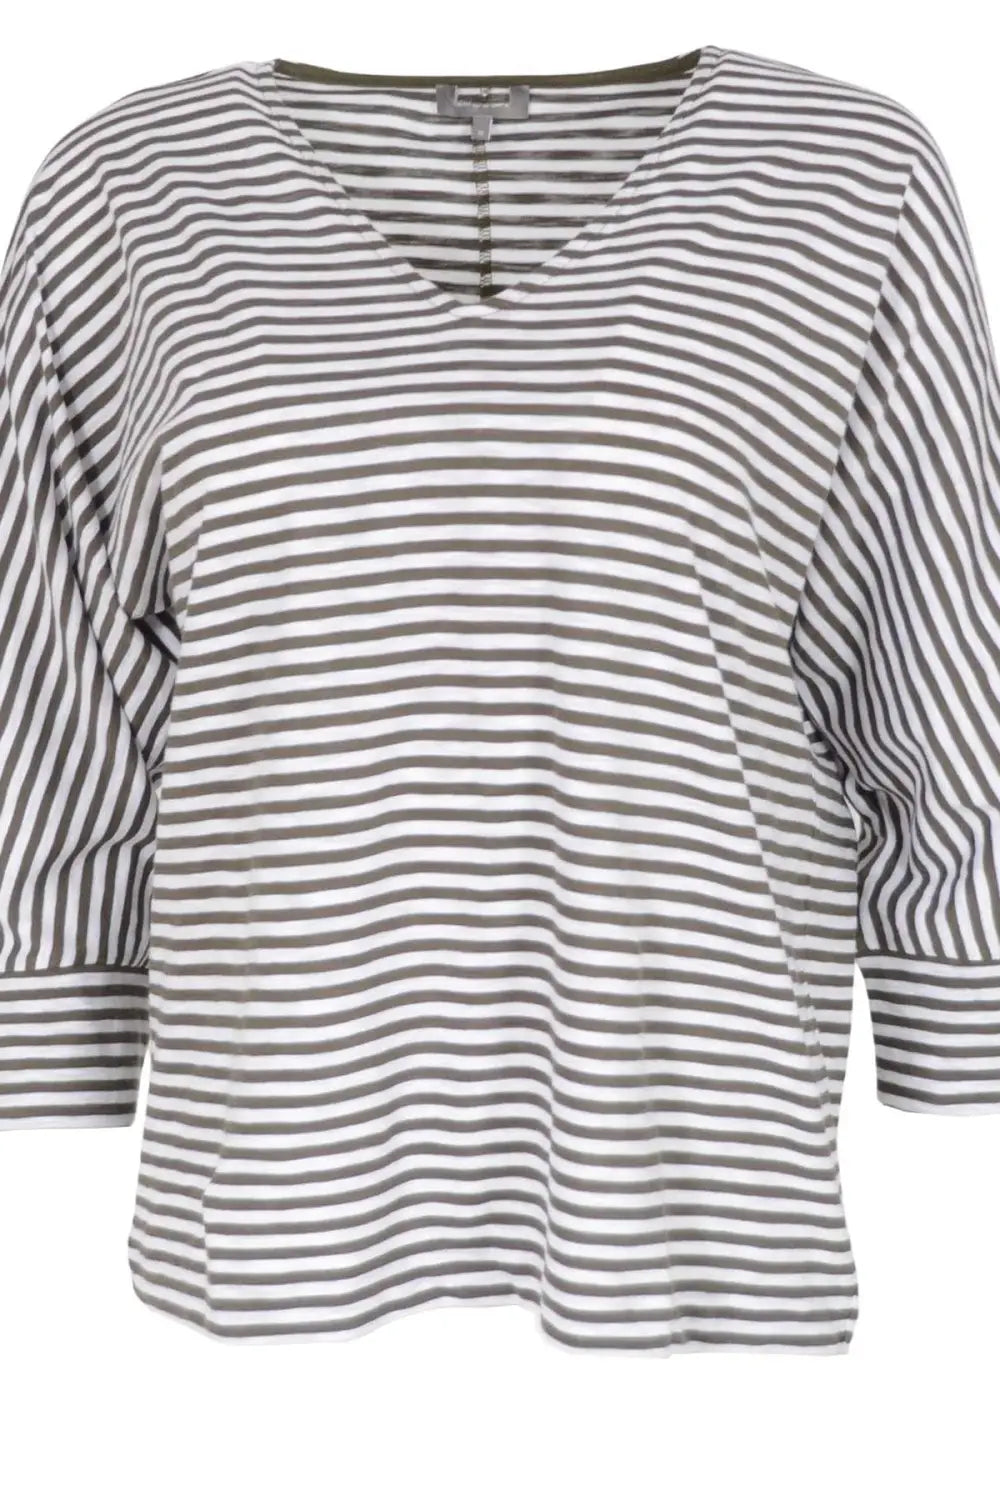 Jaeger Striped Batwing Top